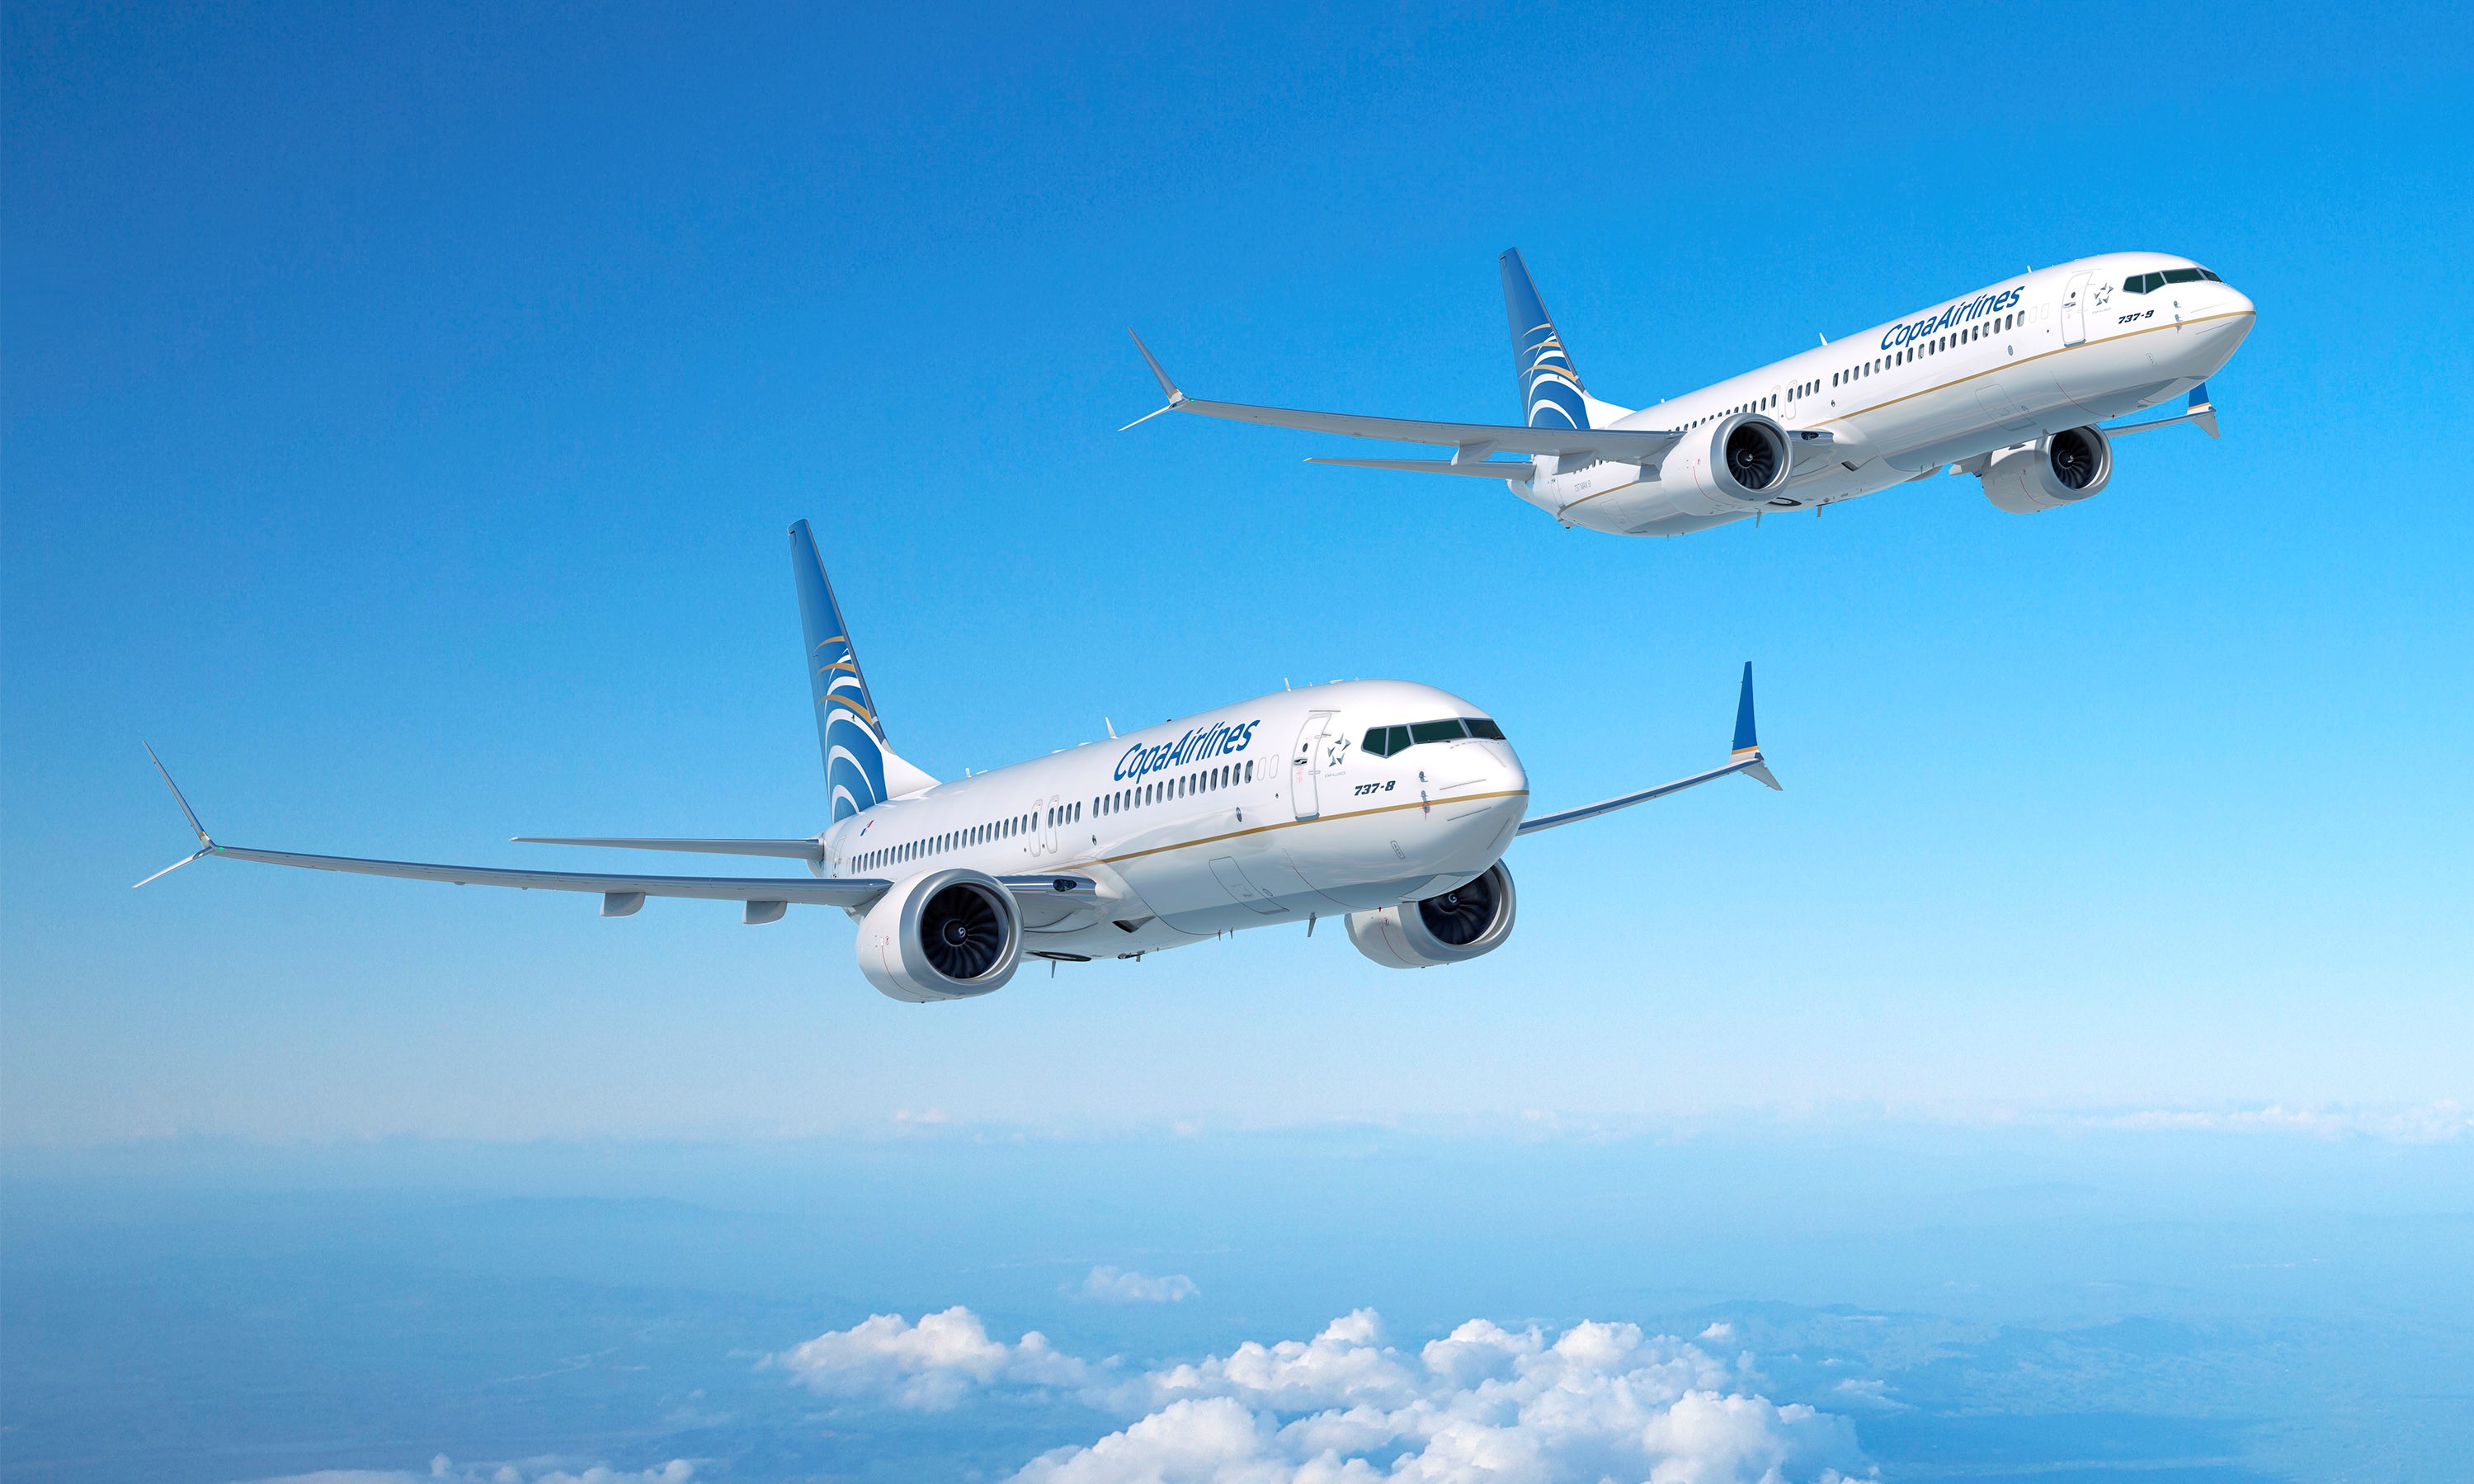 Copa Airlines: A Challenging Buy, But Business Travel Recovery May Help  (NYSE:CPA)